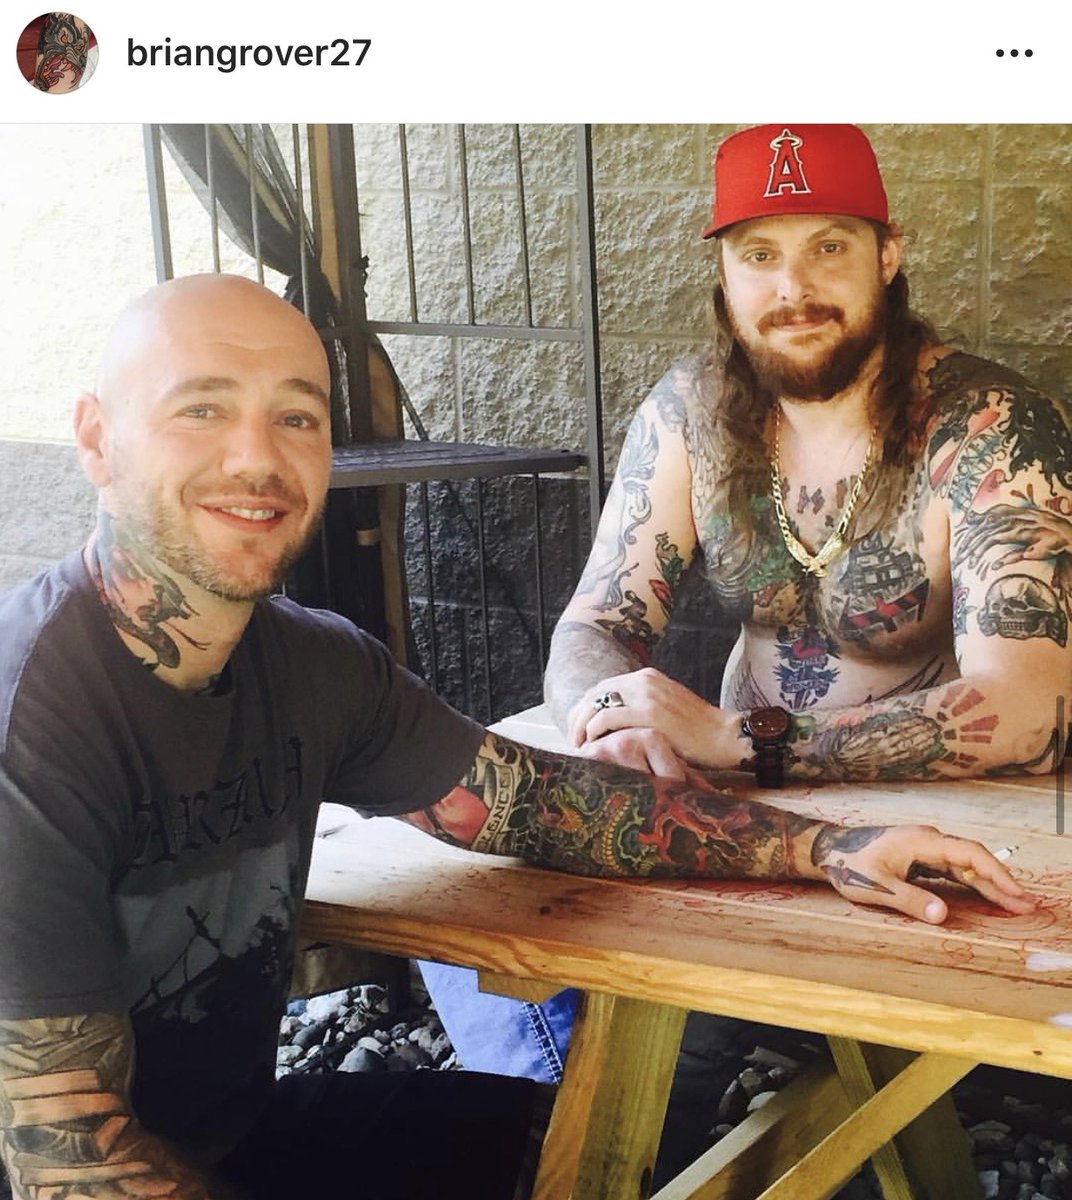 People call Brian Grover, who owns Autonomy Tattoo, "The Nicest Nazi"